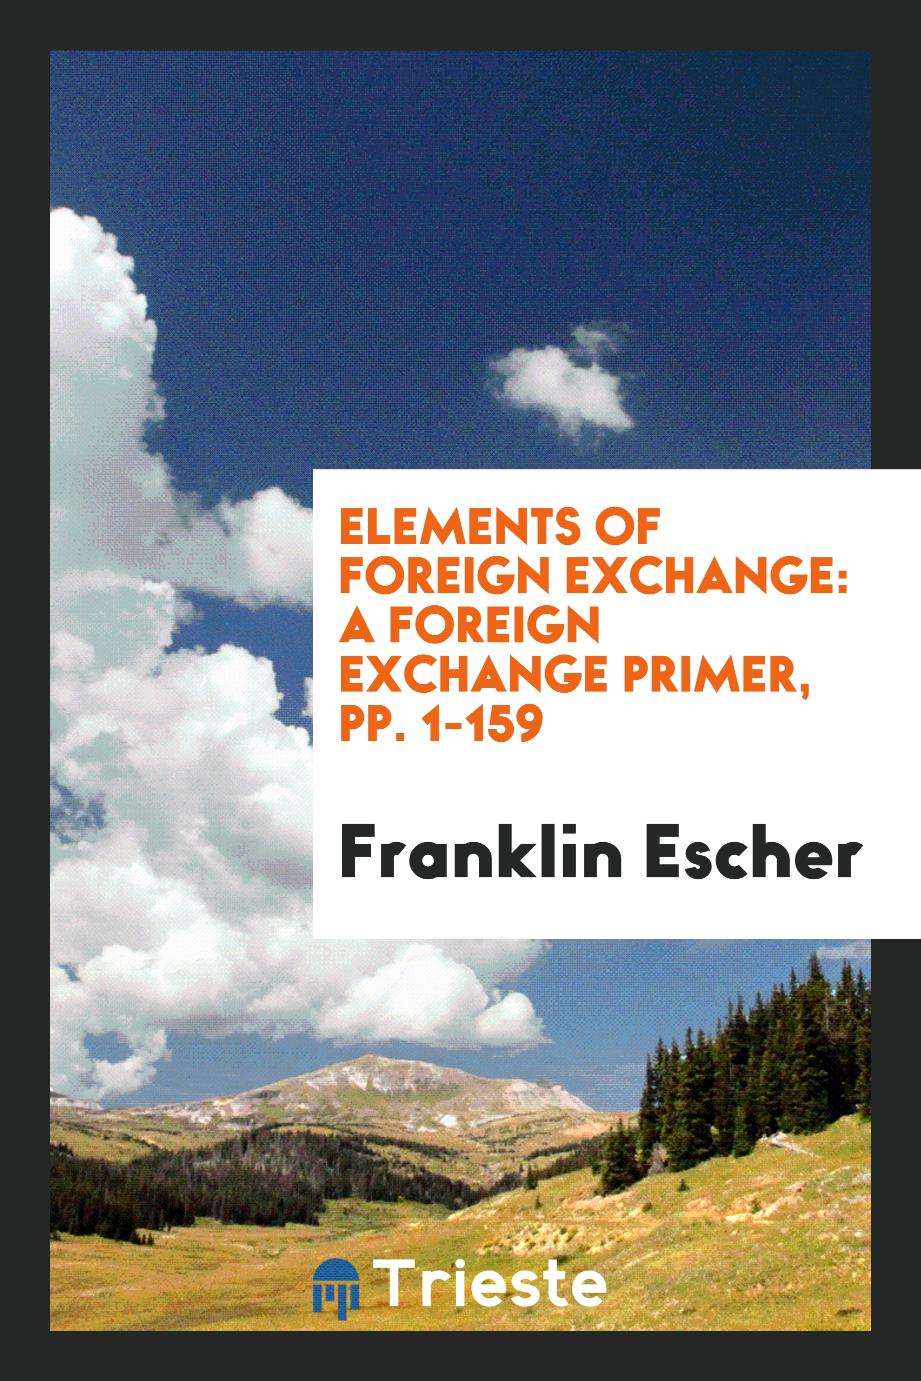 Elements of Foreign Exchange: A Foreign Exchange Primer, pp. 1-159